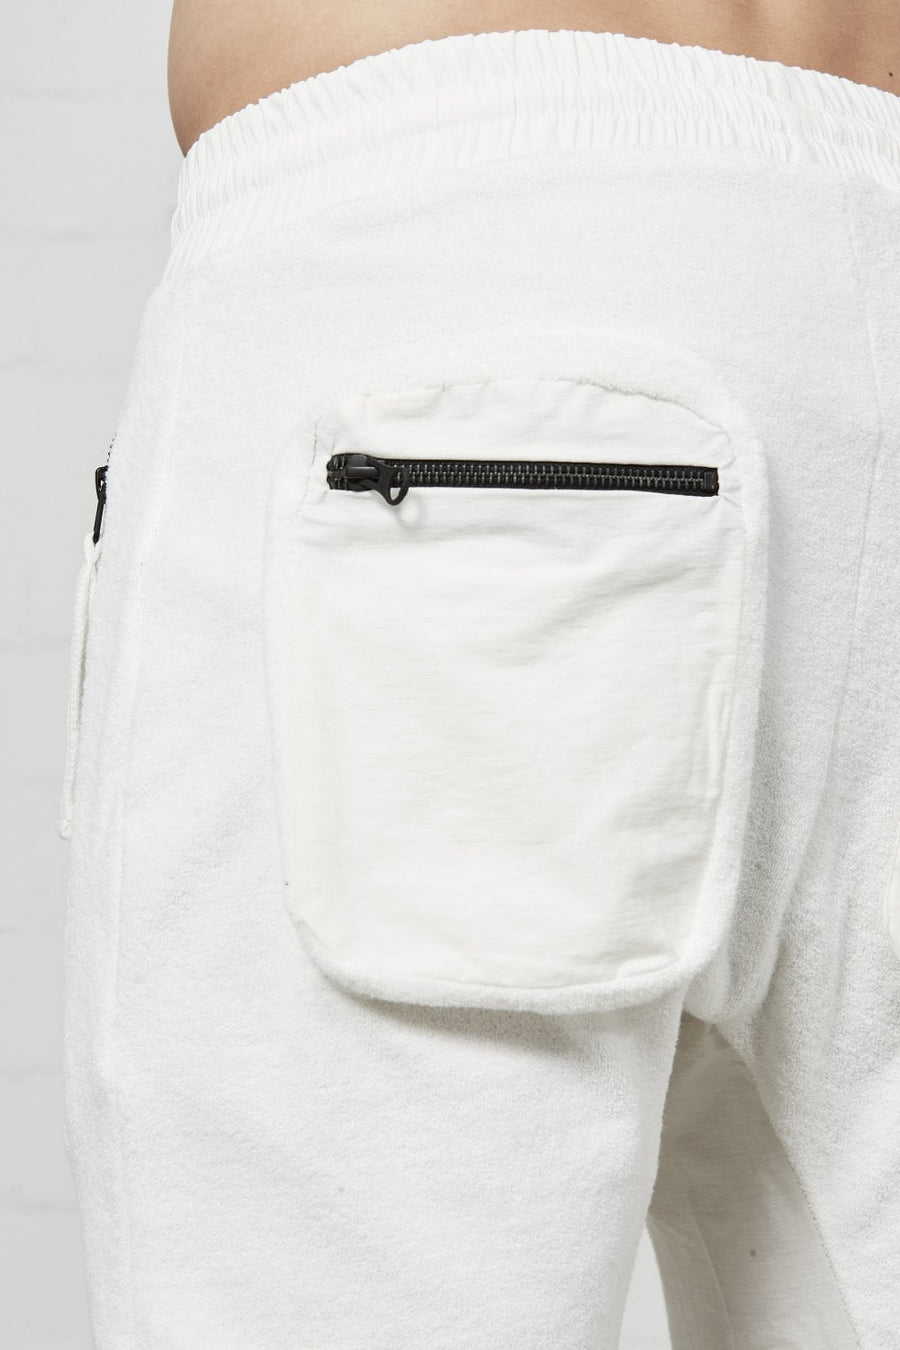 Buy the Thom Krom M ST 272 Sweatpants Off White at Intro. Spend £50 for free UK delivery. Official stockists. We ship worldwide.